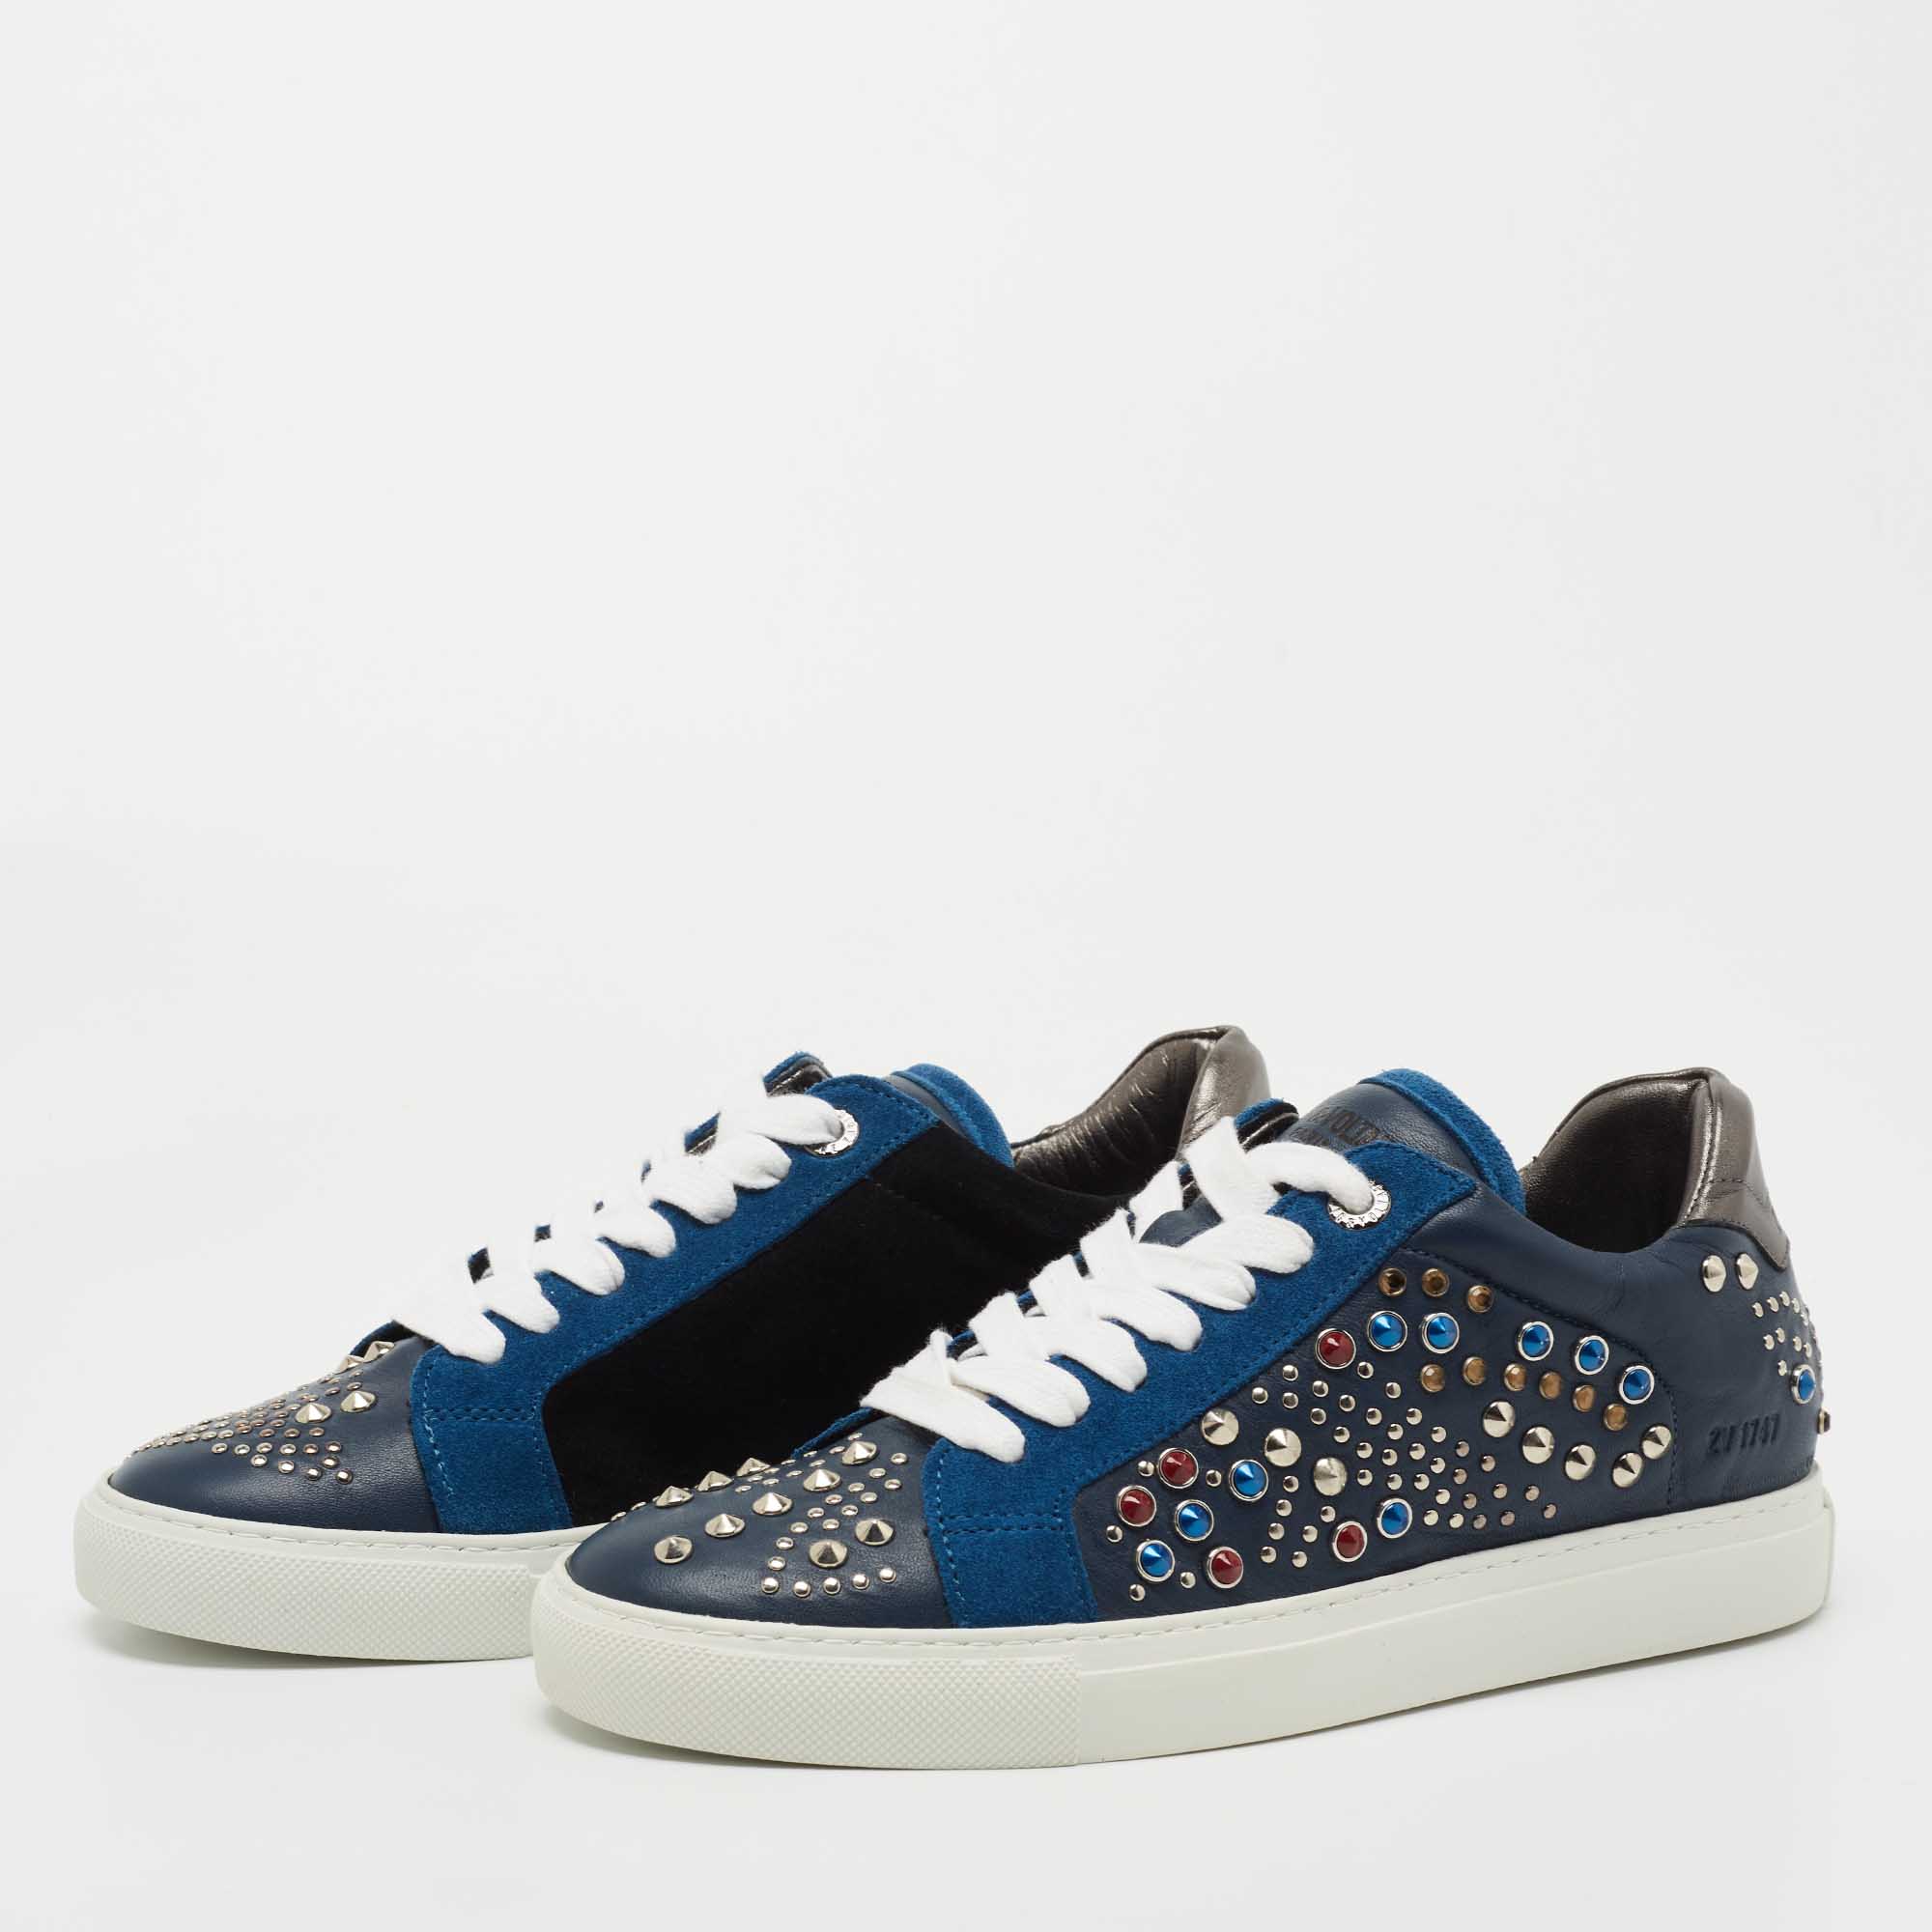 

Zadig and Voltaire Tricolor Studded Leather and Suede Jungle Clous Sneakers Size, Blue